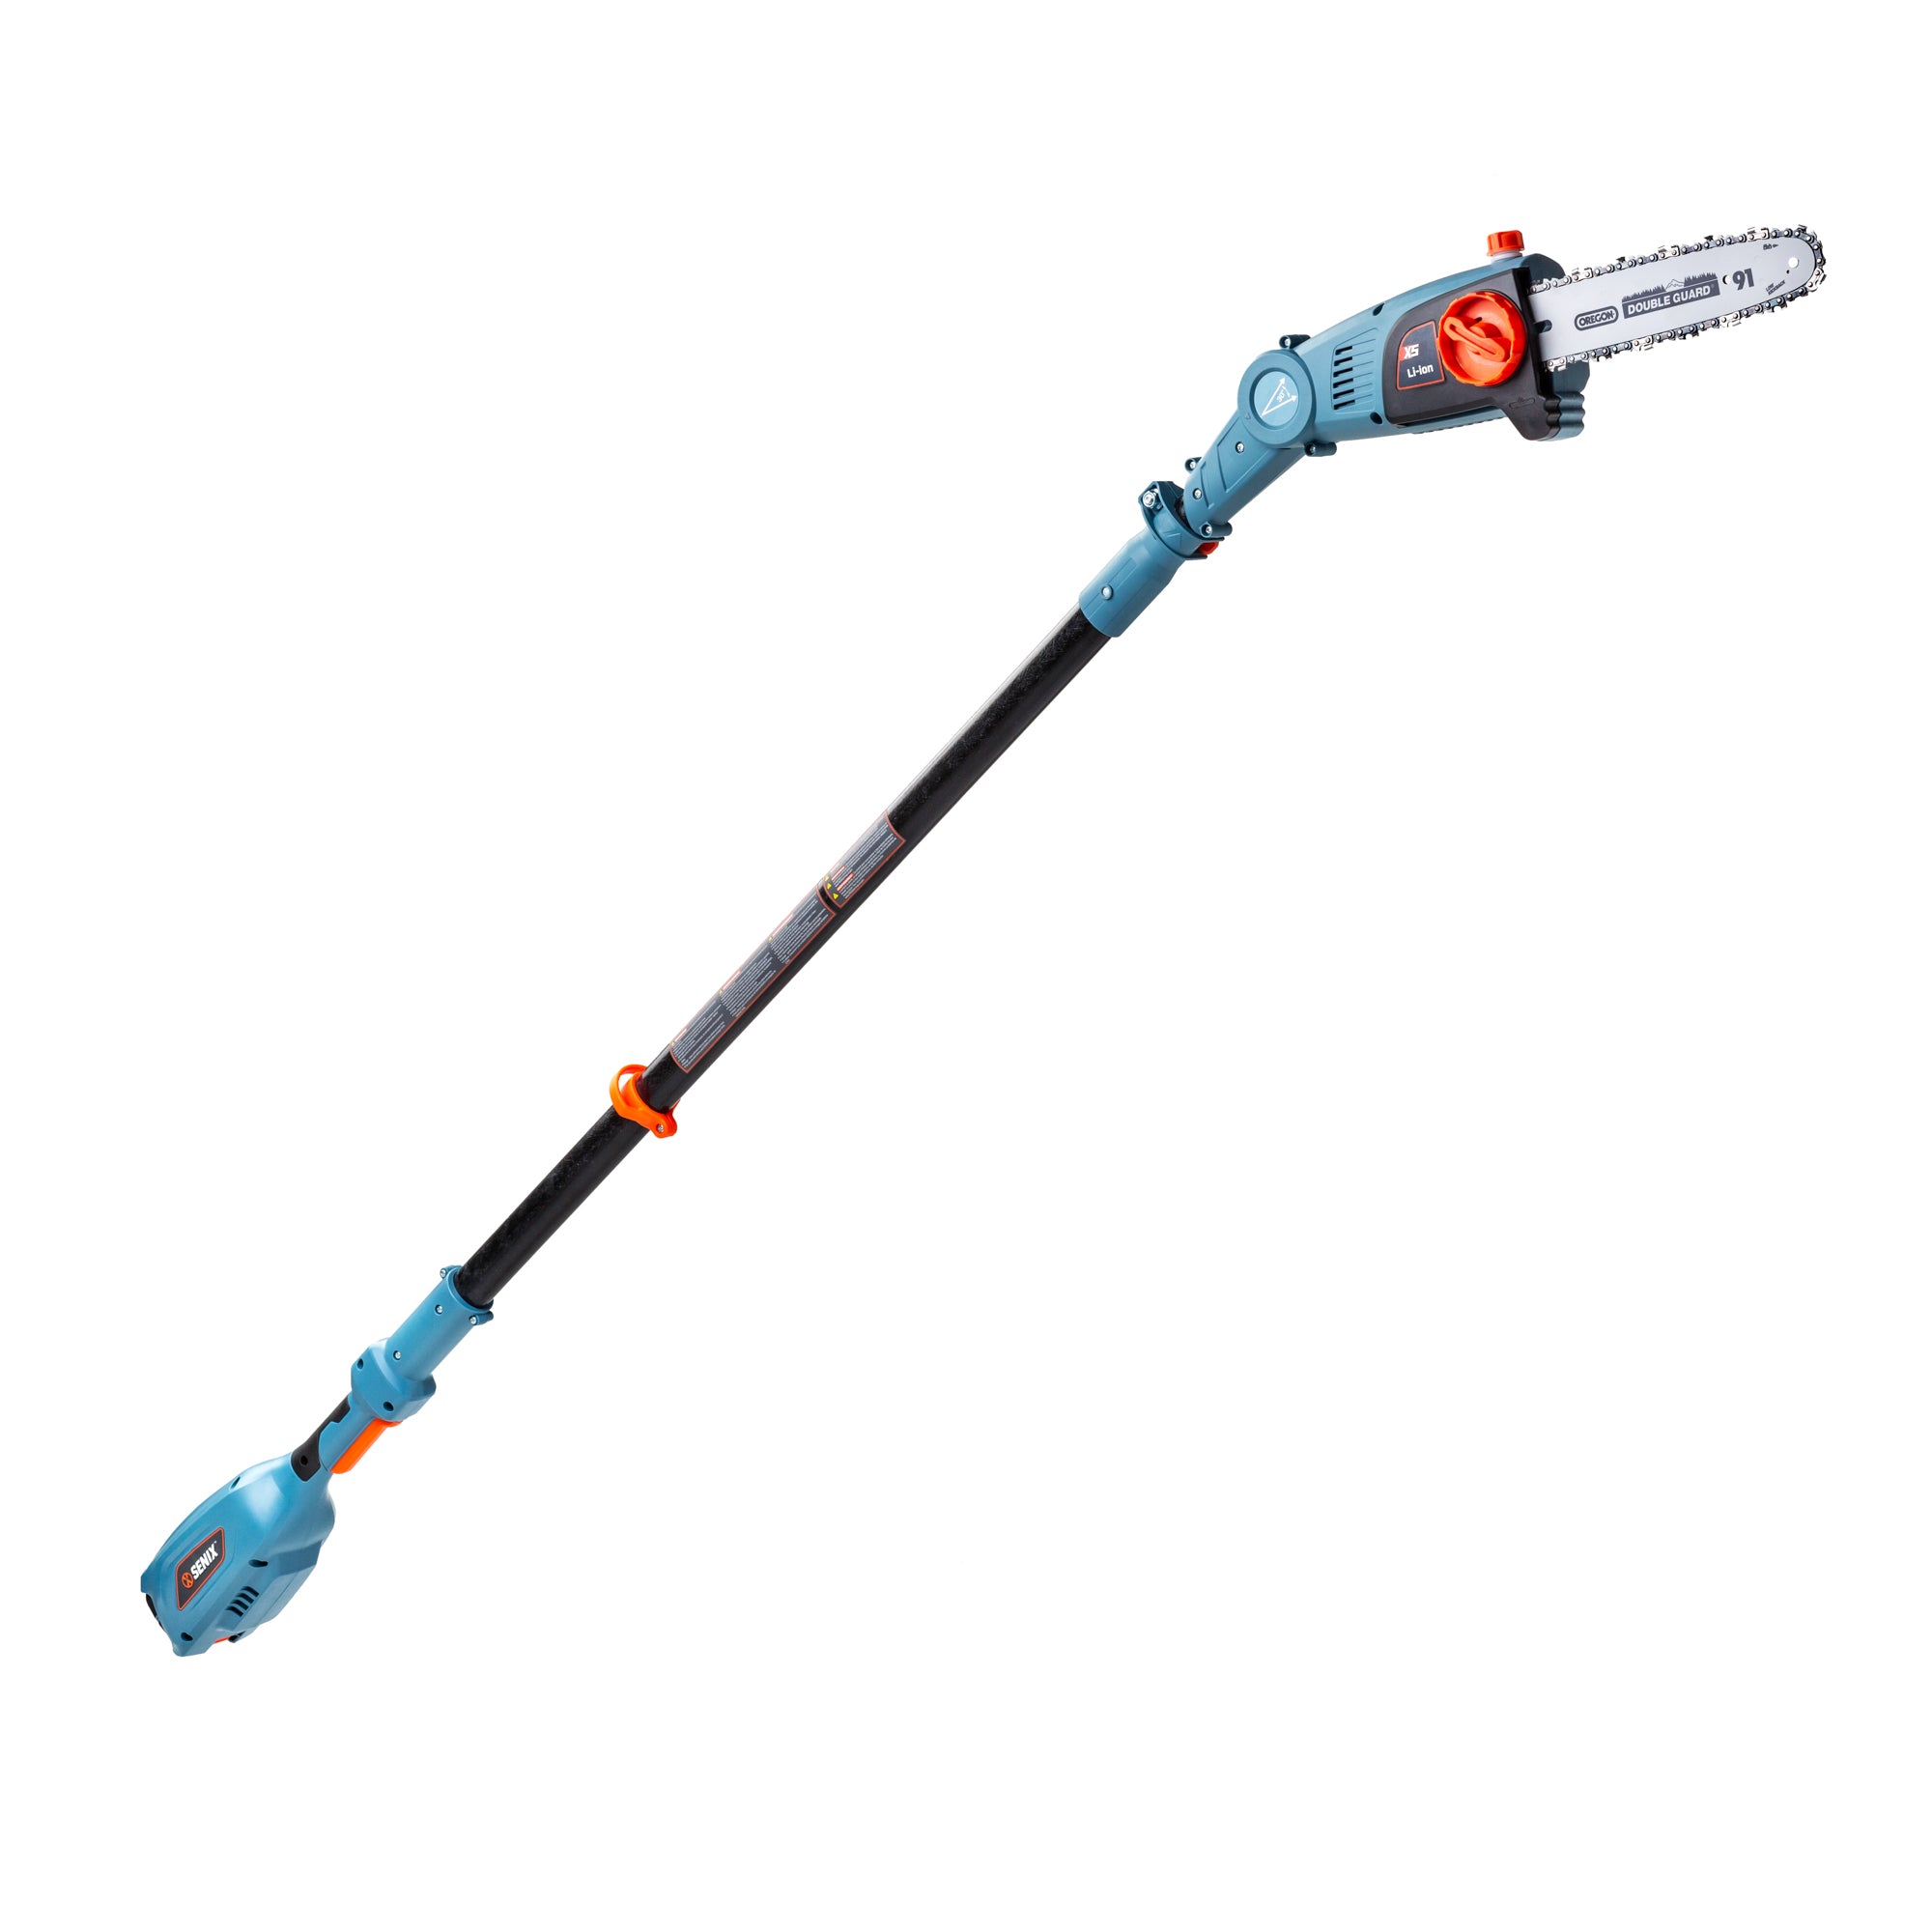 10 in. 6.5 AMP Corded Electric Pole Saw with Automatic Oiler